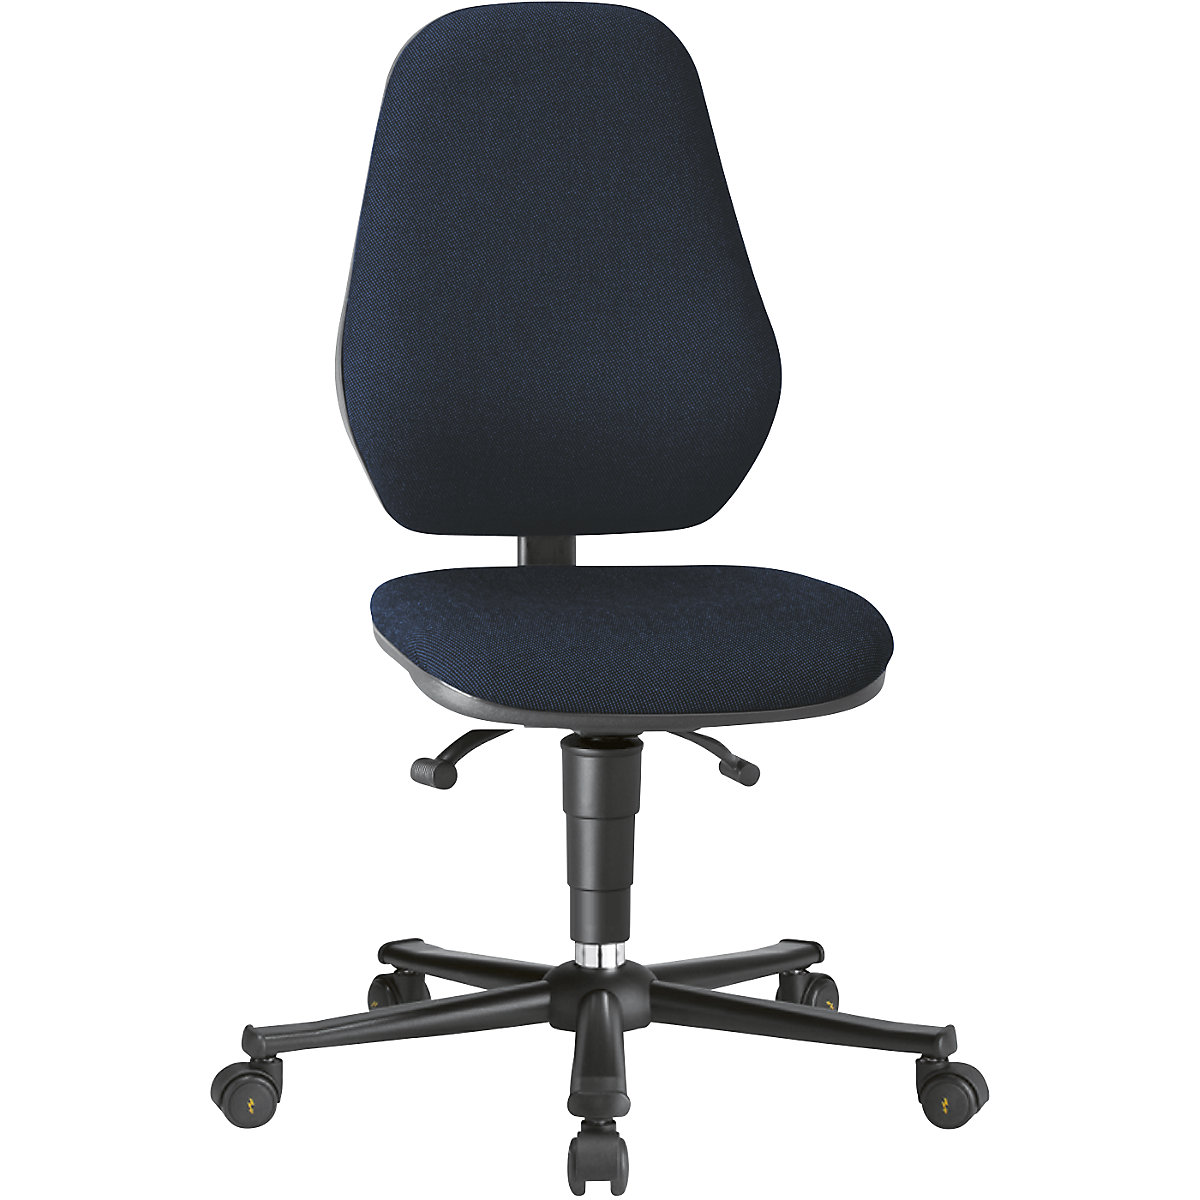 Industrial swivel chair – bimos, with ESD protection, gas spring, with castors, blue fabric covering-8